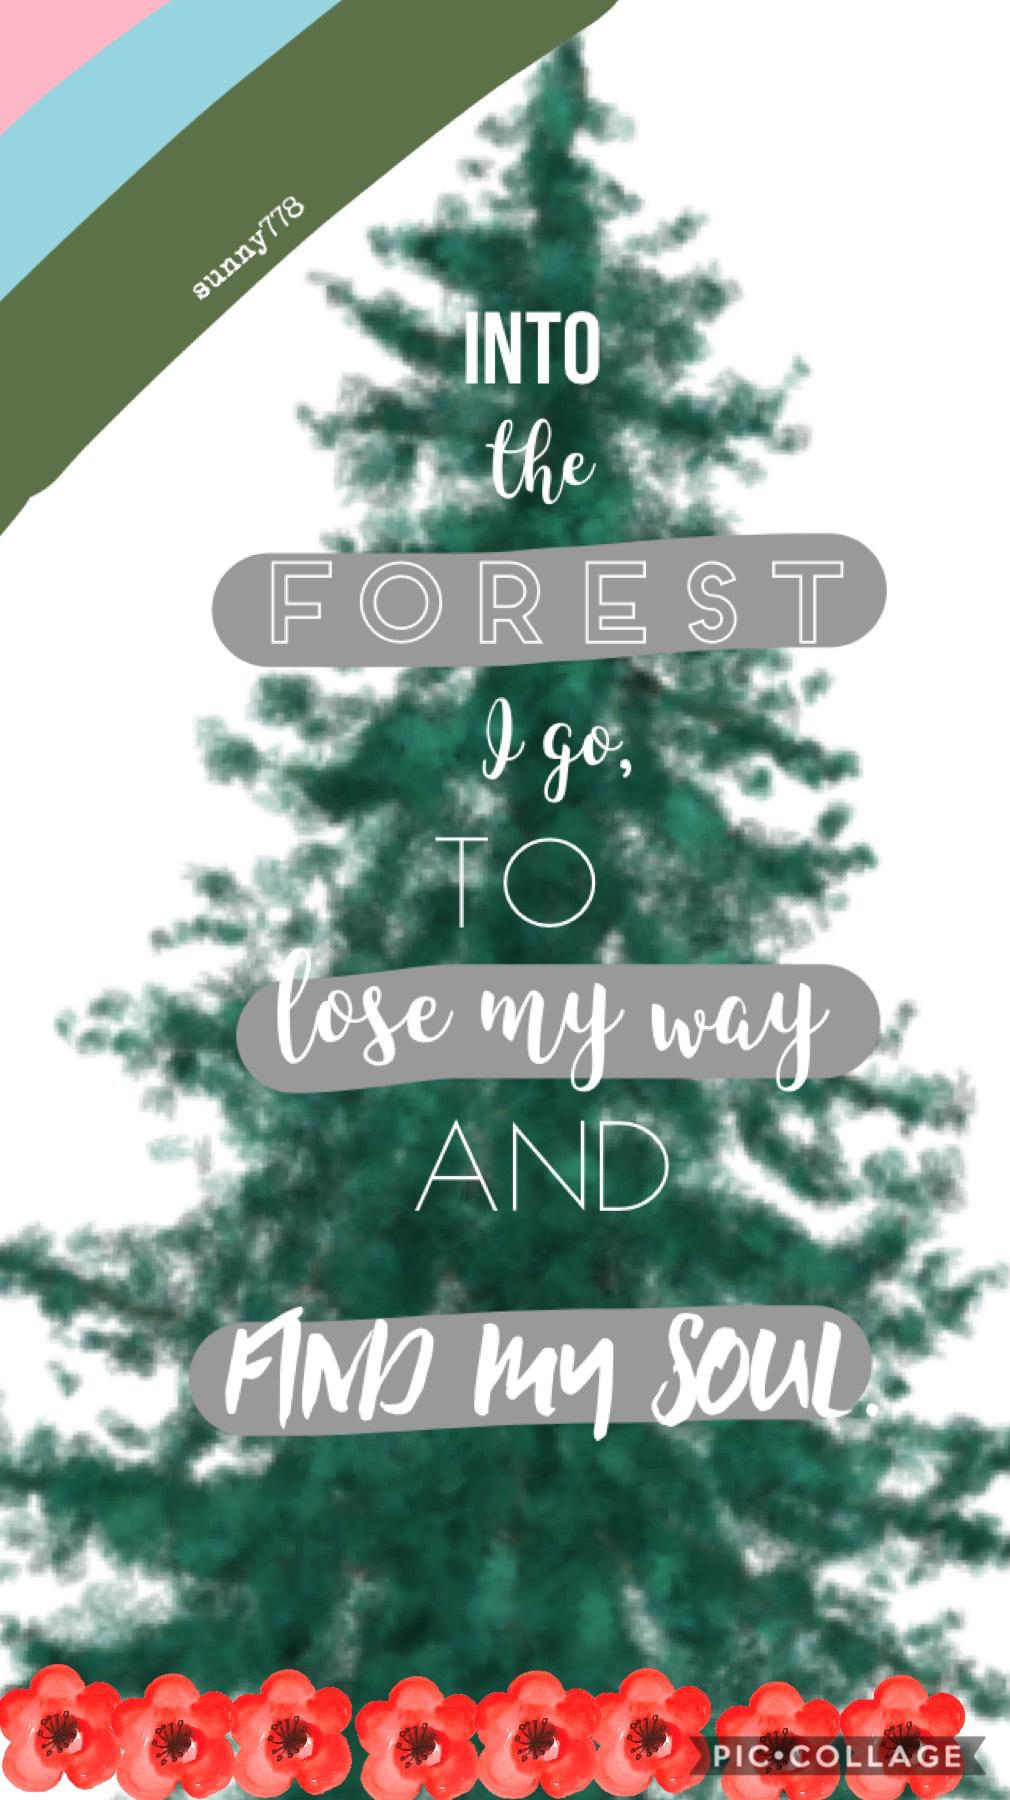 🌳3/12/18🌳 - a beautiful quote I saw on a drink bottle, so I decided to make a post out of it! I literally threw this together in 5 mins, so not my best ... but if you like it hit the ❤️!! 

22 days till Christmas 🎄!